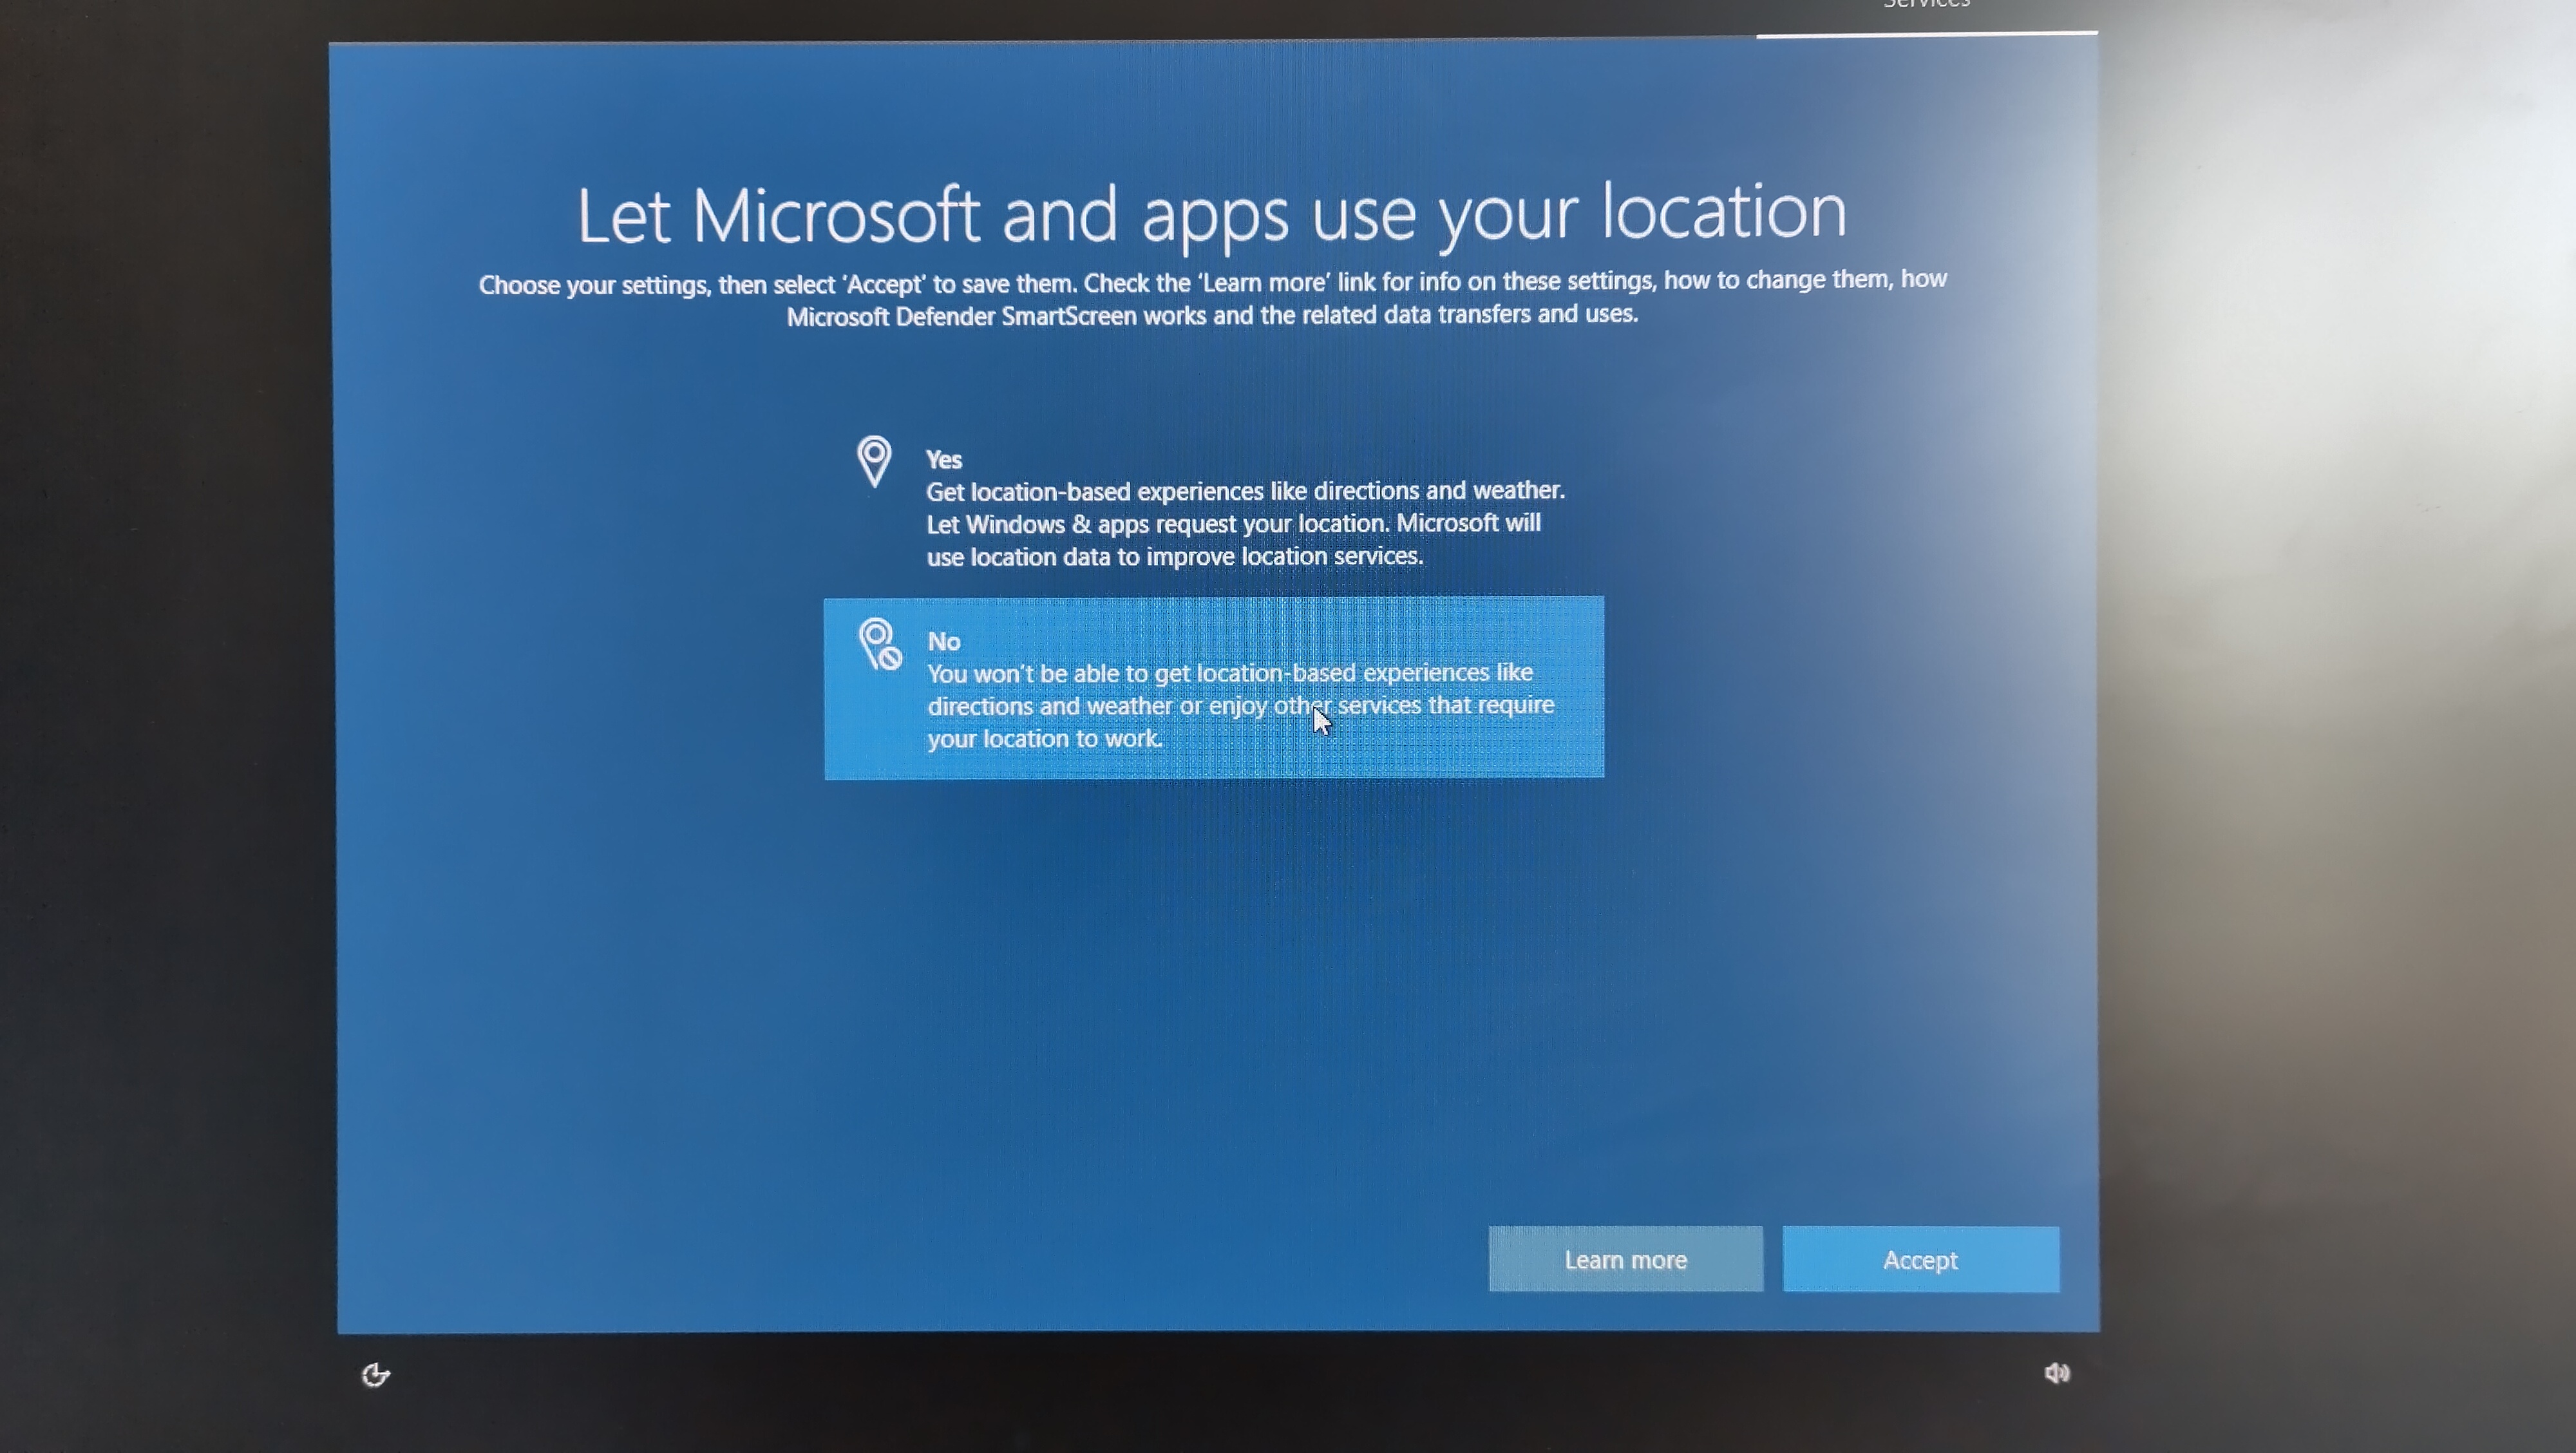 Let Microsoft and apps use your location